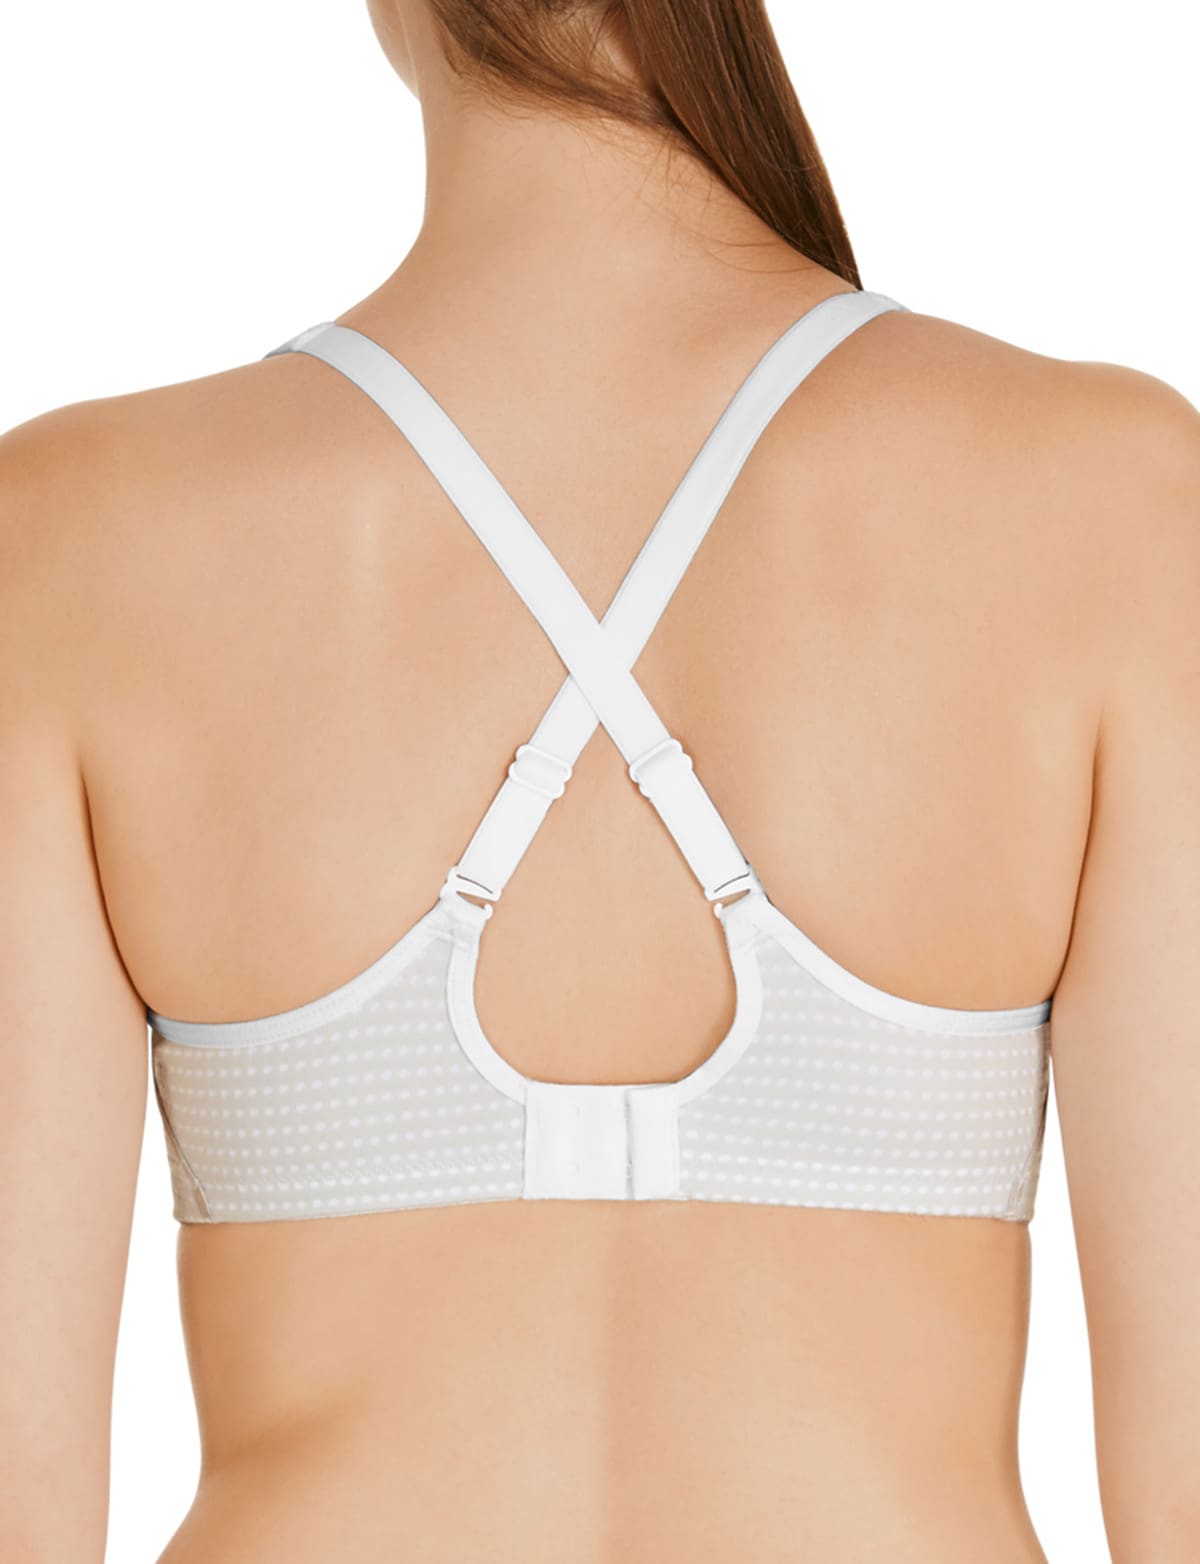 Berlei Barely There Contour Deluxe Bra YZ6Z 10A White